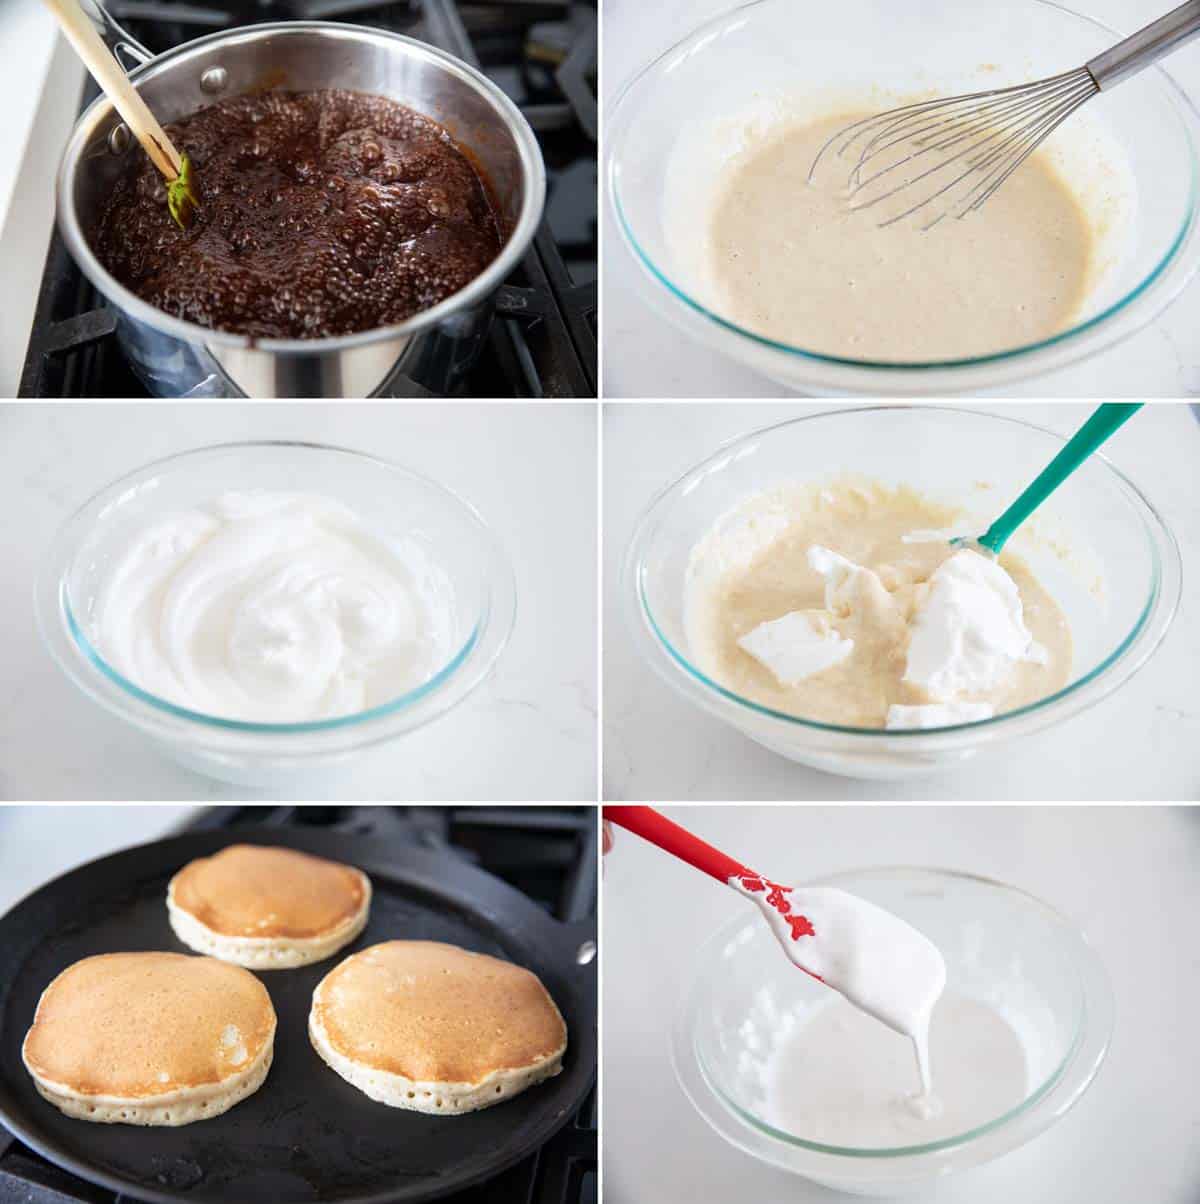 Steps to make s'mores pancakes with homemade chocolate sauce.